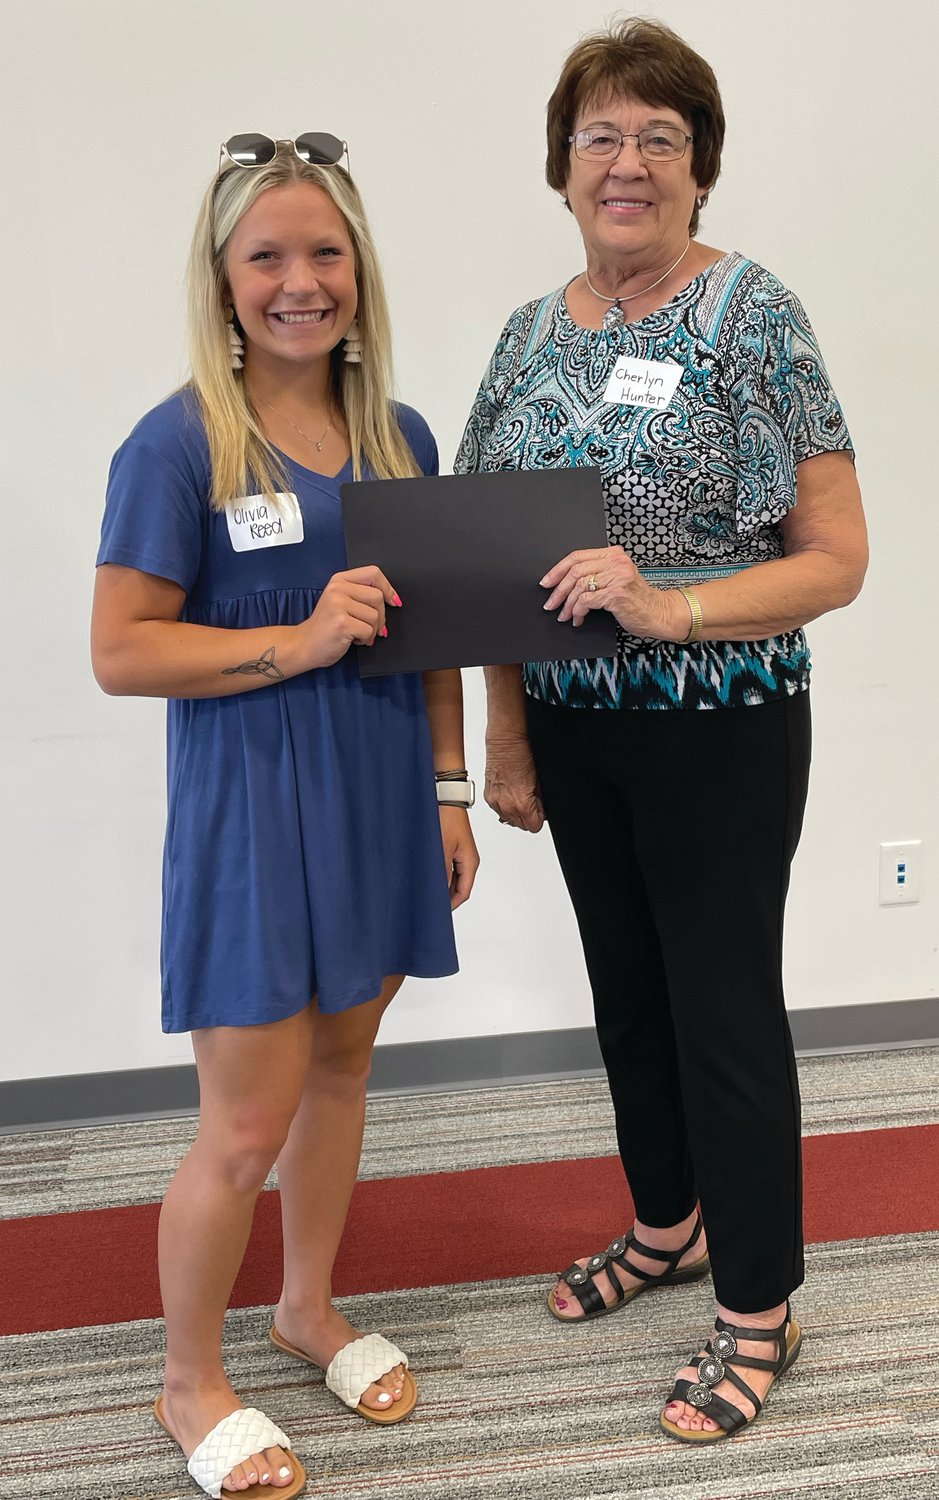 Scholarship recipient Olivia Reed, left, is pictured with DKG scholarship chairperson Cherlyn Hunter.